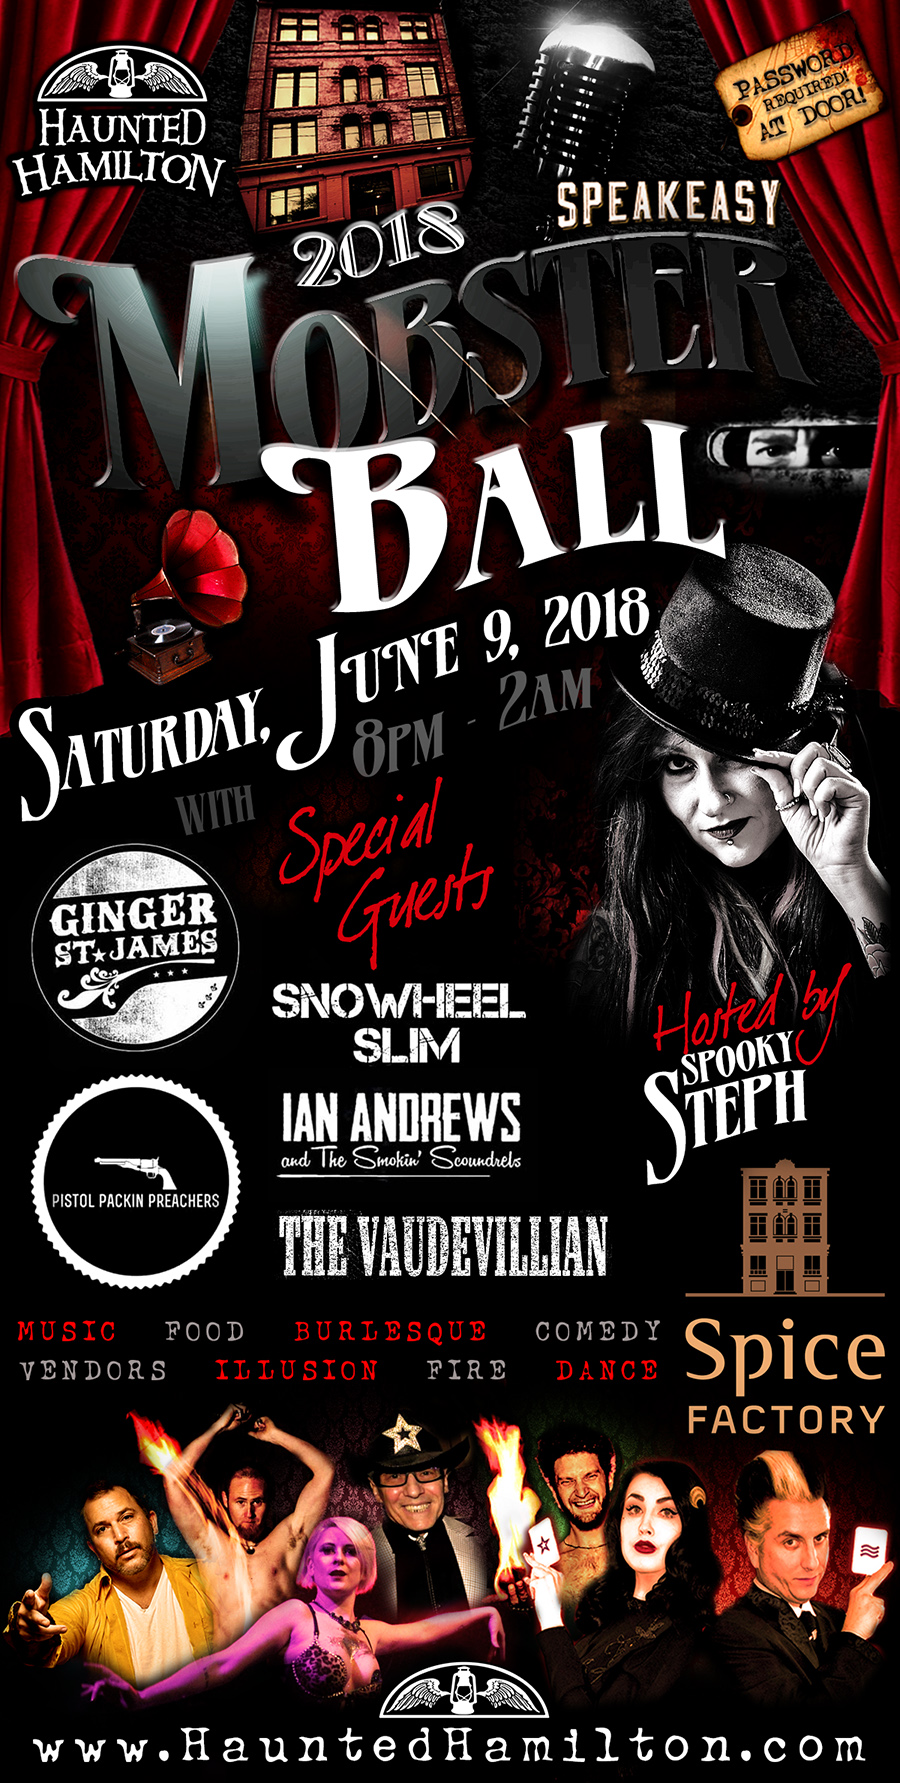 2018 MOBSTER BALL with Haunted Hamilton at The Spice Factory hosted by "Spooky Steph" | Saturday, June 9, 2018 | 121 Hughson St. N. Hamilton, Ontario